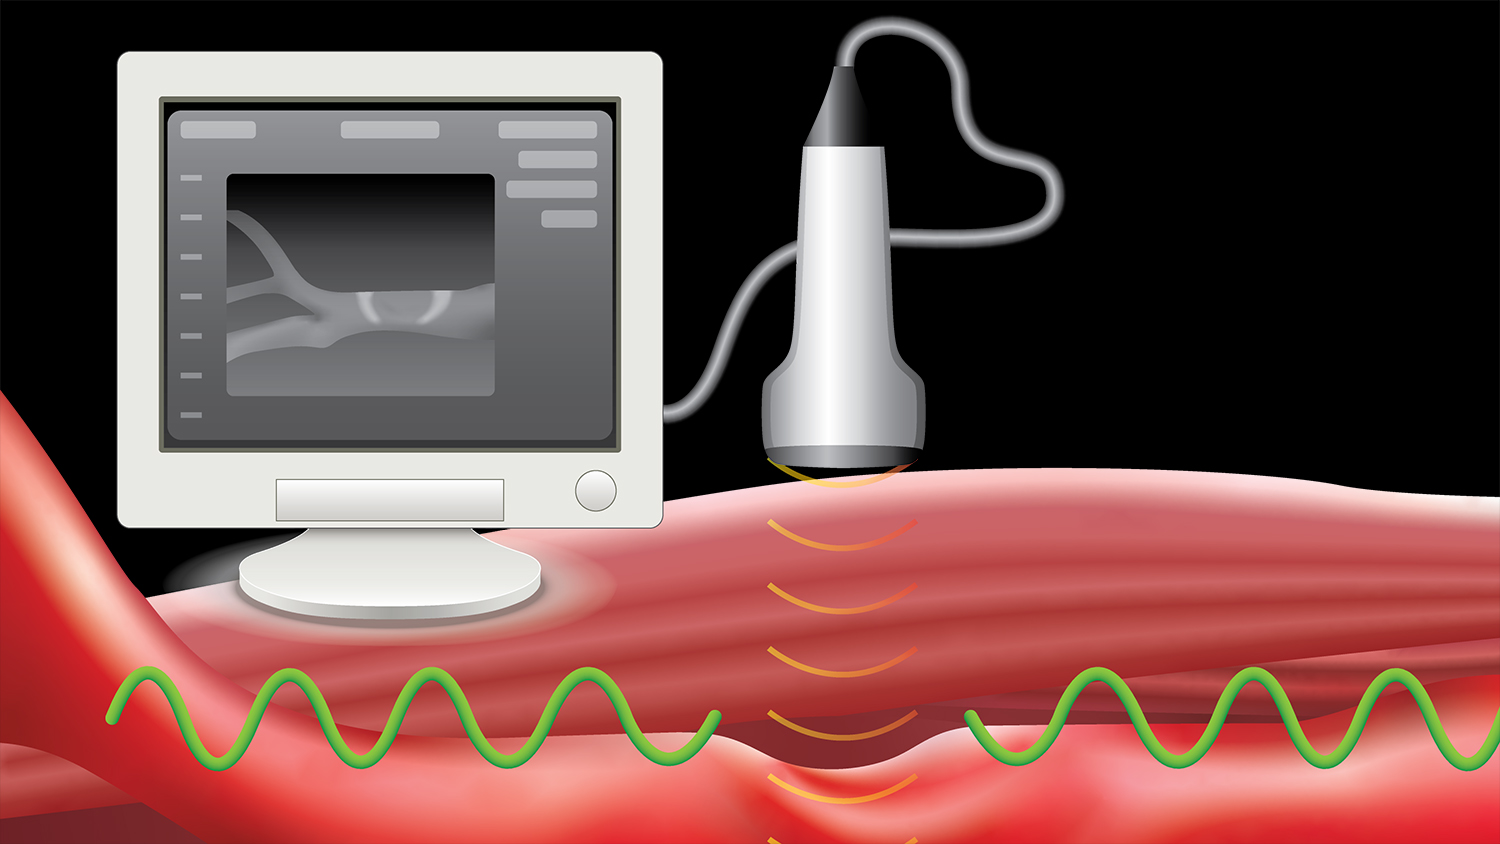 In this illustration, an ultrasound transducer sends a wave that pushes against arterial walls and records the wave propagation.